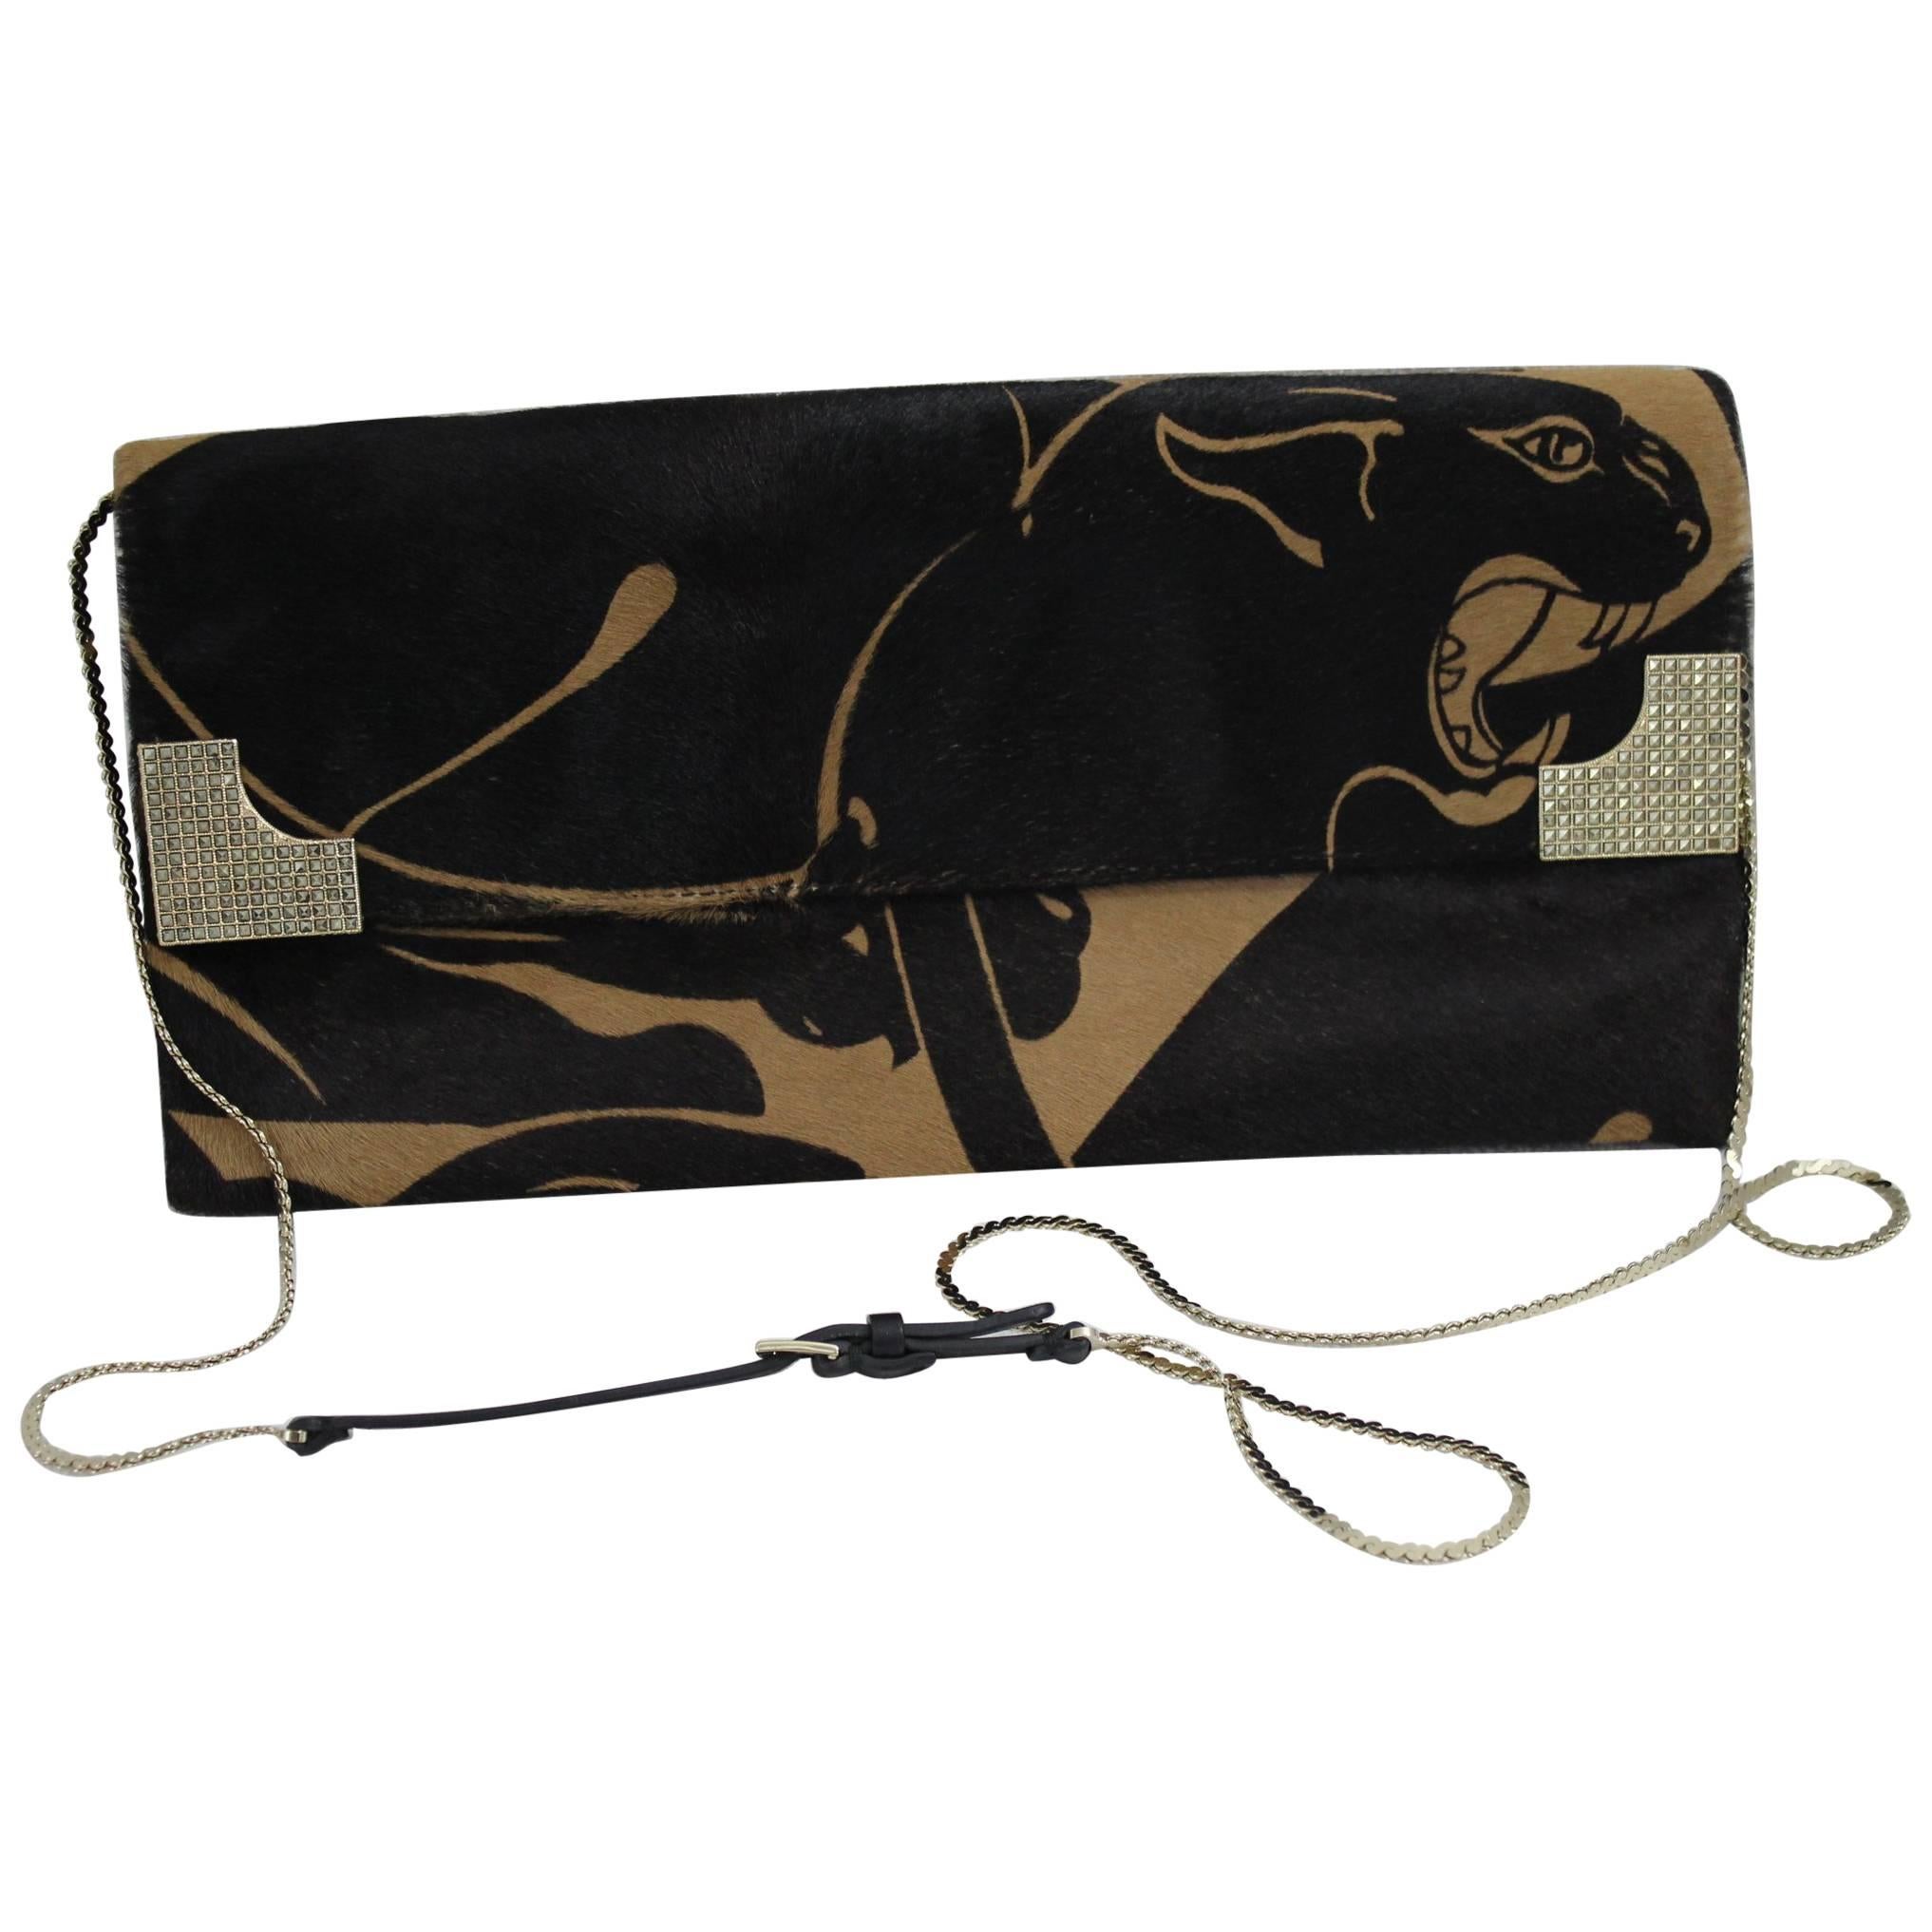 Panthere Valentino Clutch with shoulder strap in Calkskin Poney Style Leathe For Sale